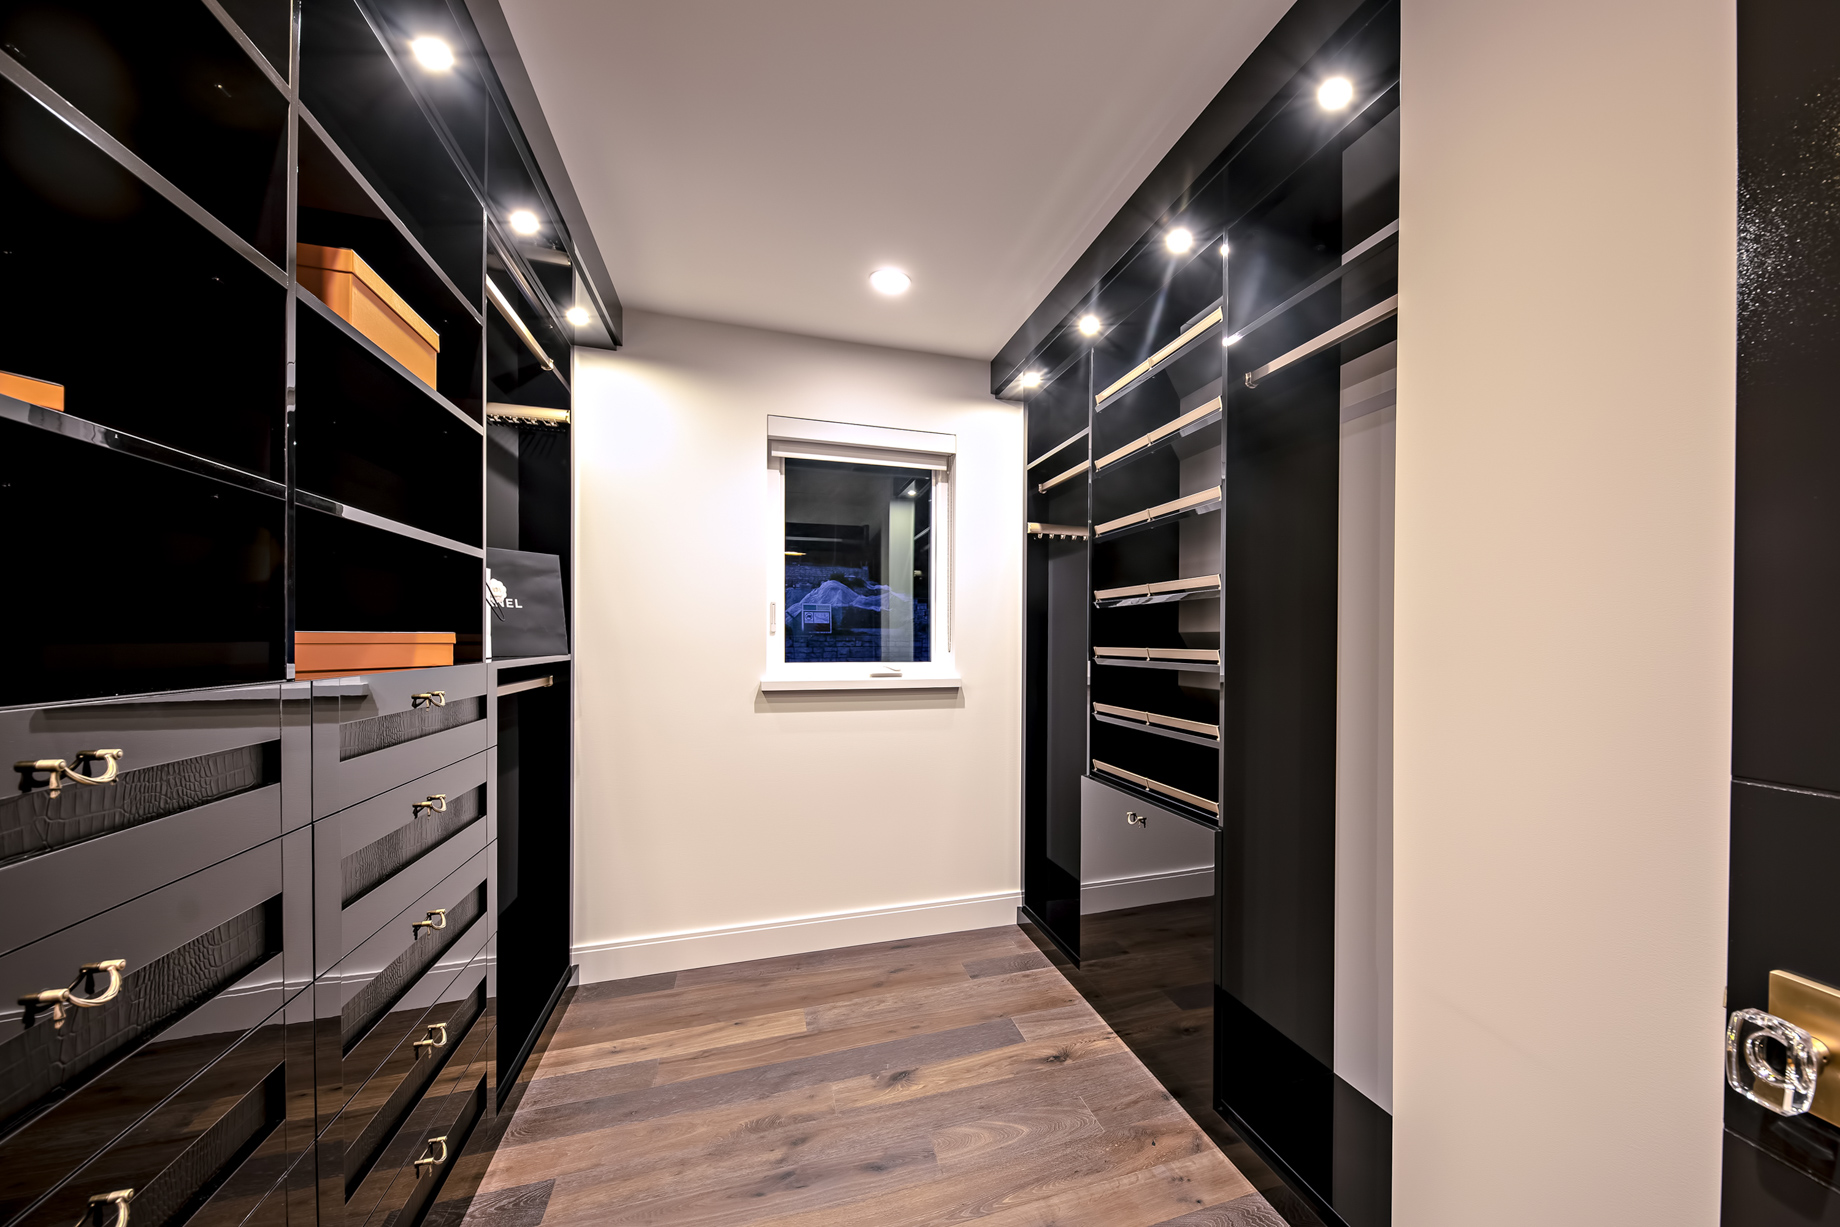 2121 Union Court, West Vancouver, BC, Canada - Closet - Luxury Real Estate - West Coast Modern Home